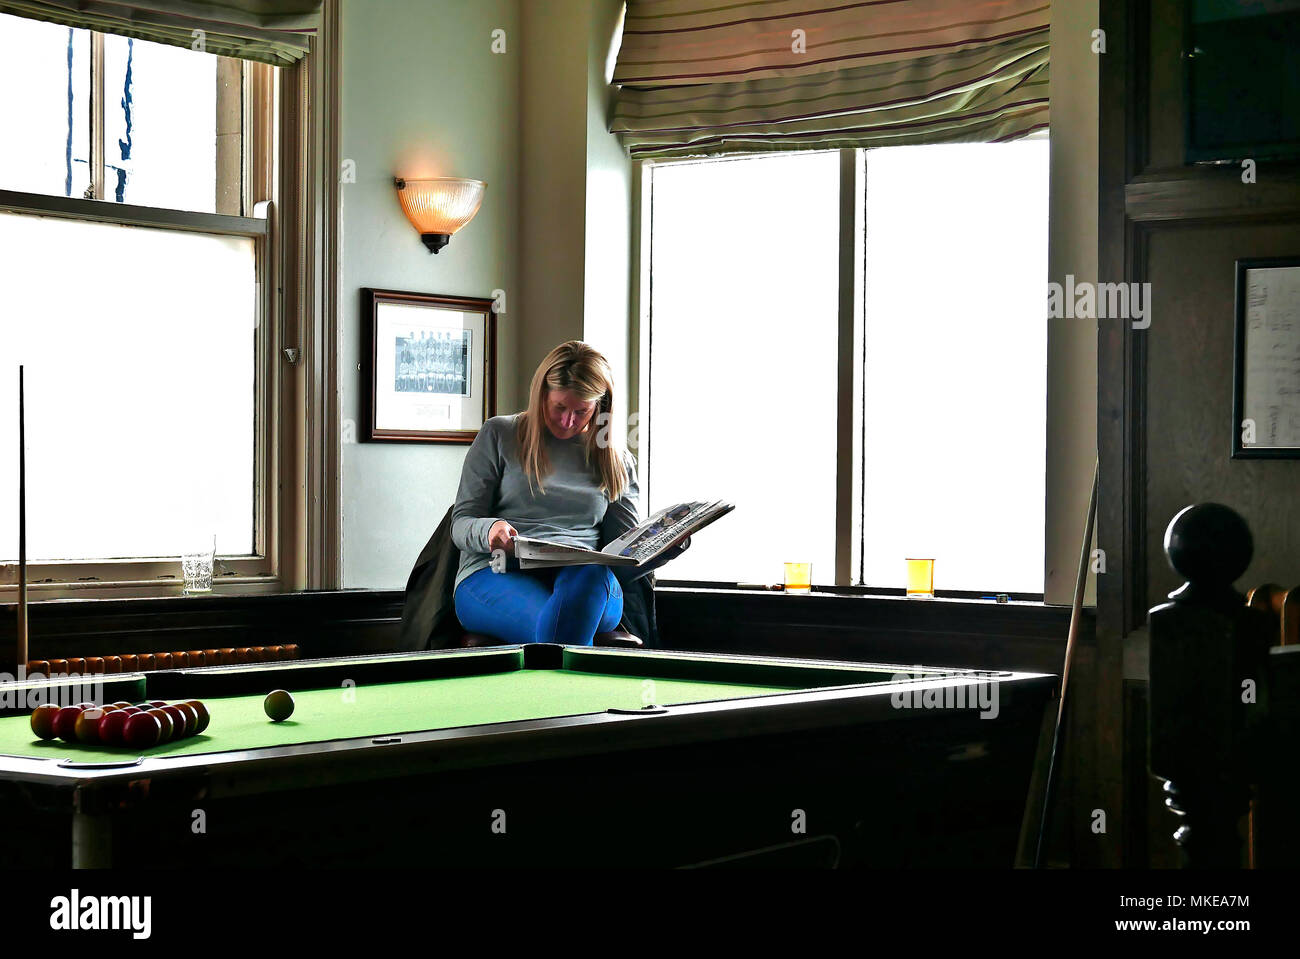 Young women sat on bar stool reading newspaper whist waiting for a game of pool Stock Photo